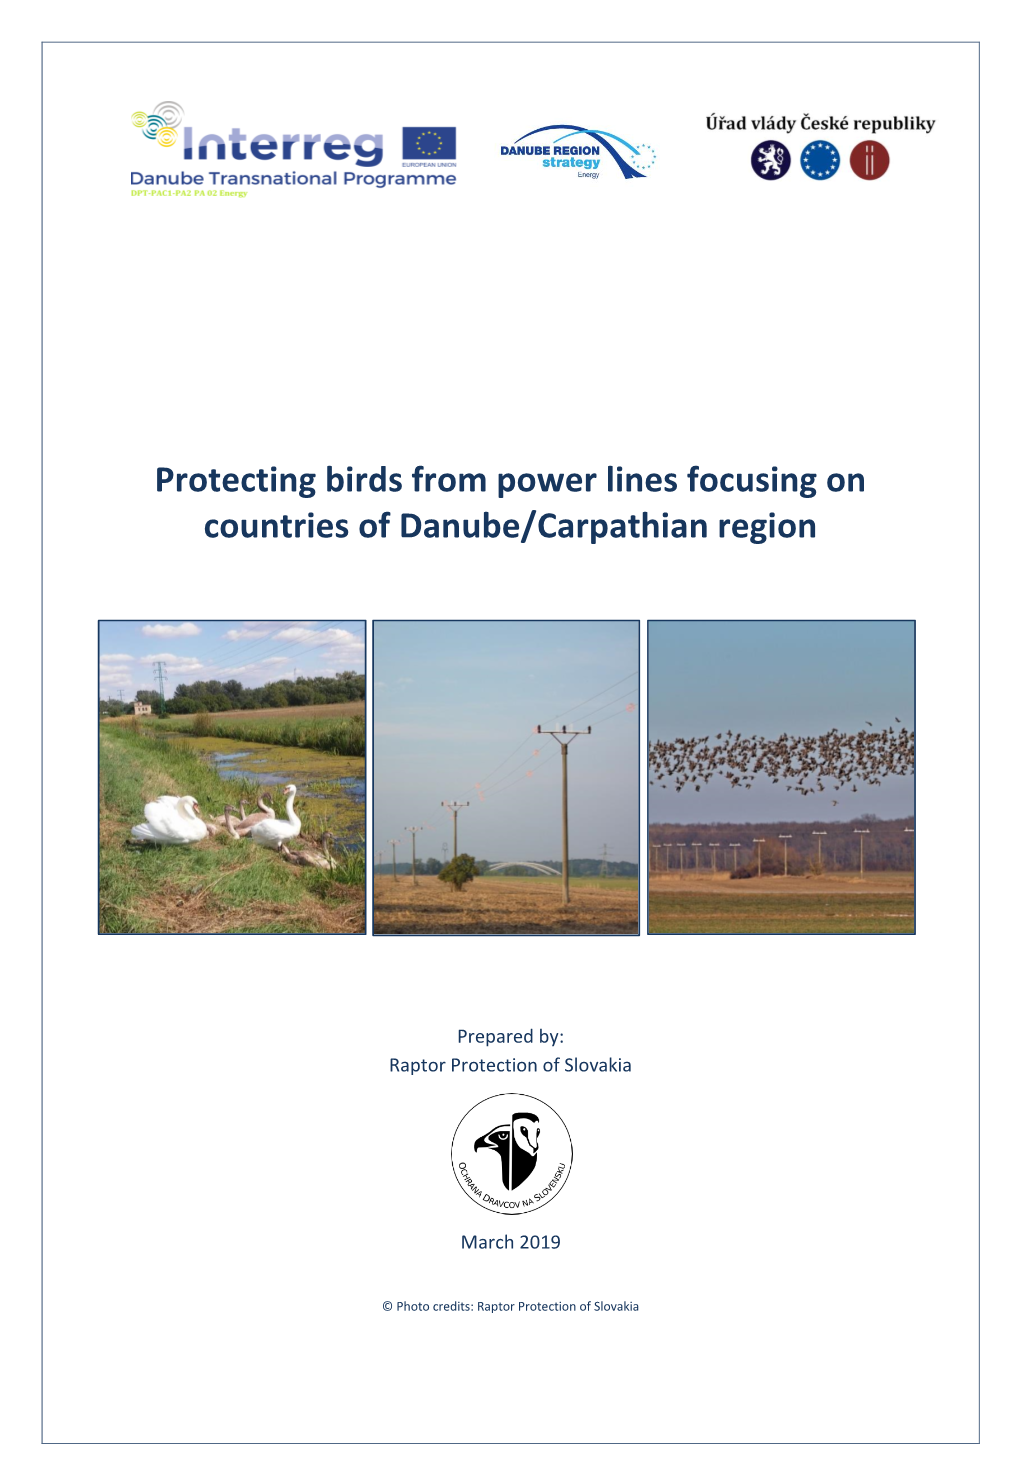 „Protecting Birds from Power Lines Focusing on Countries of Danube/Carpathian Region“